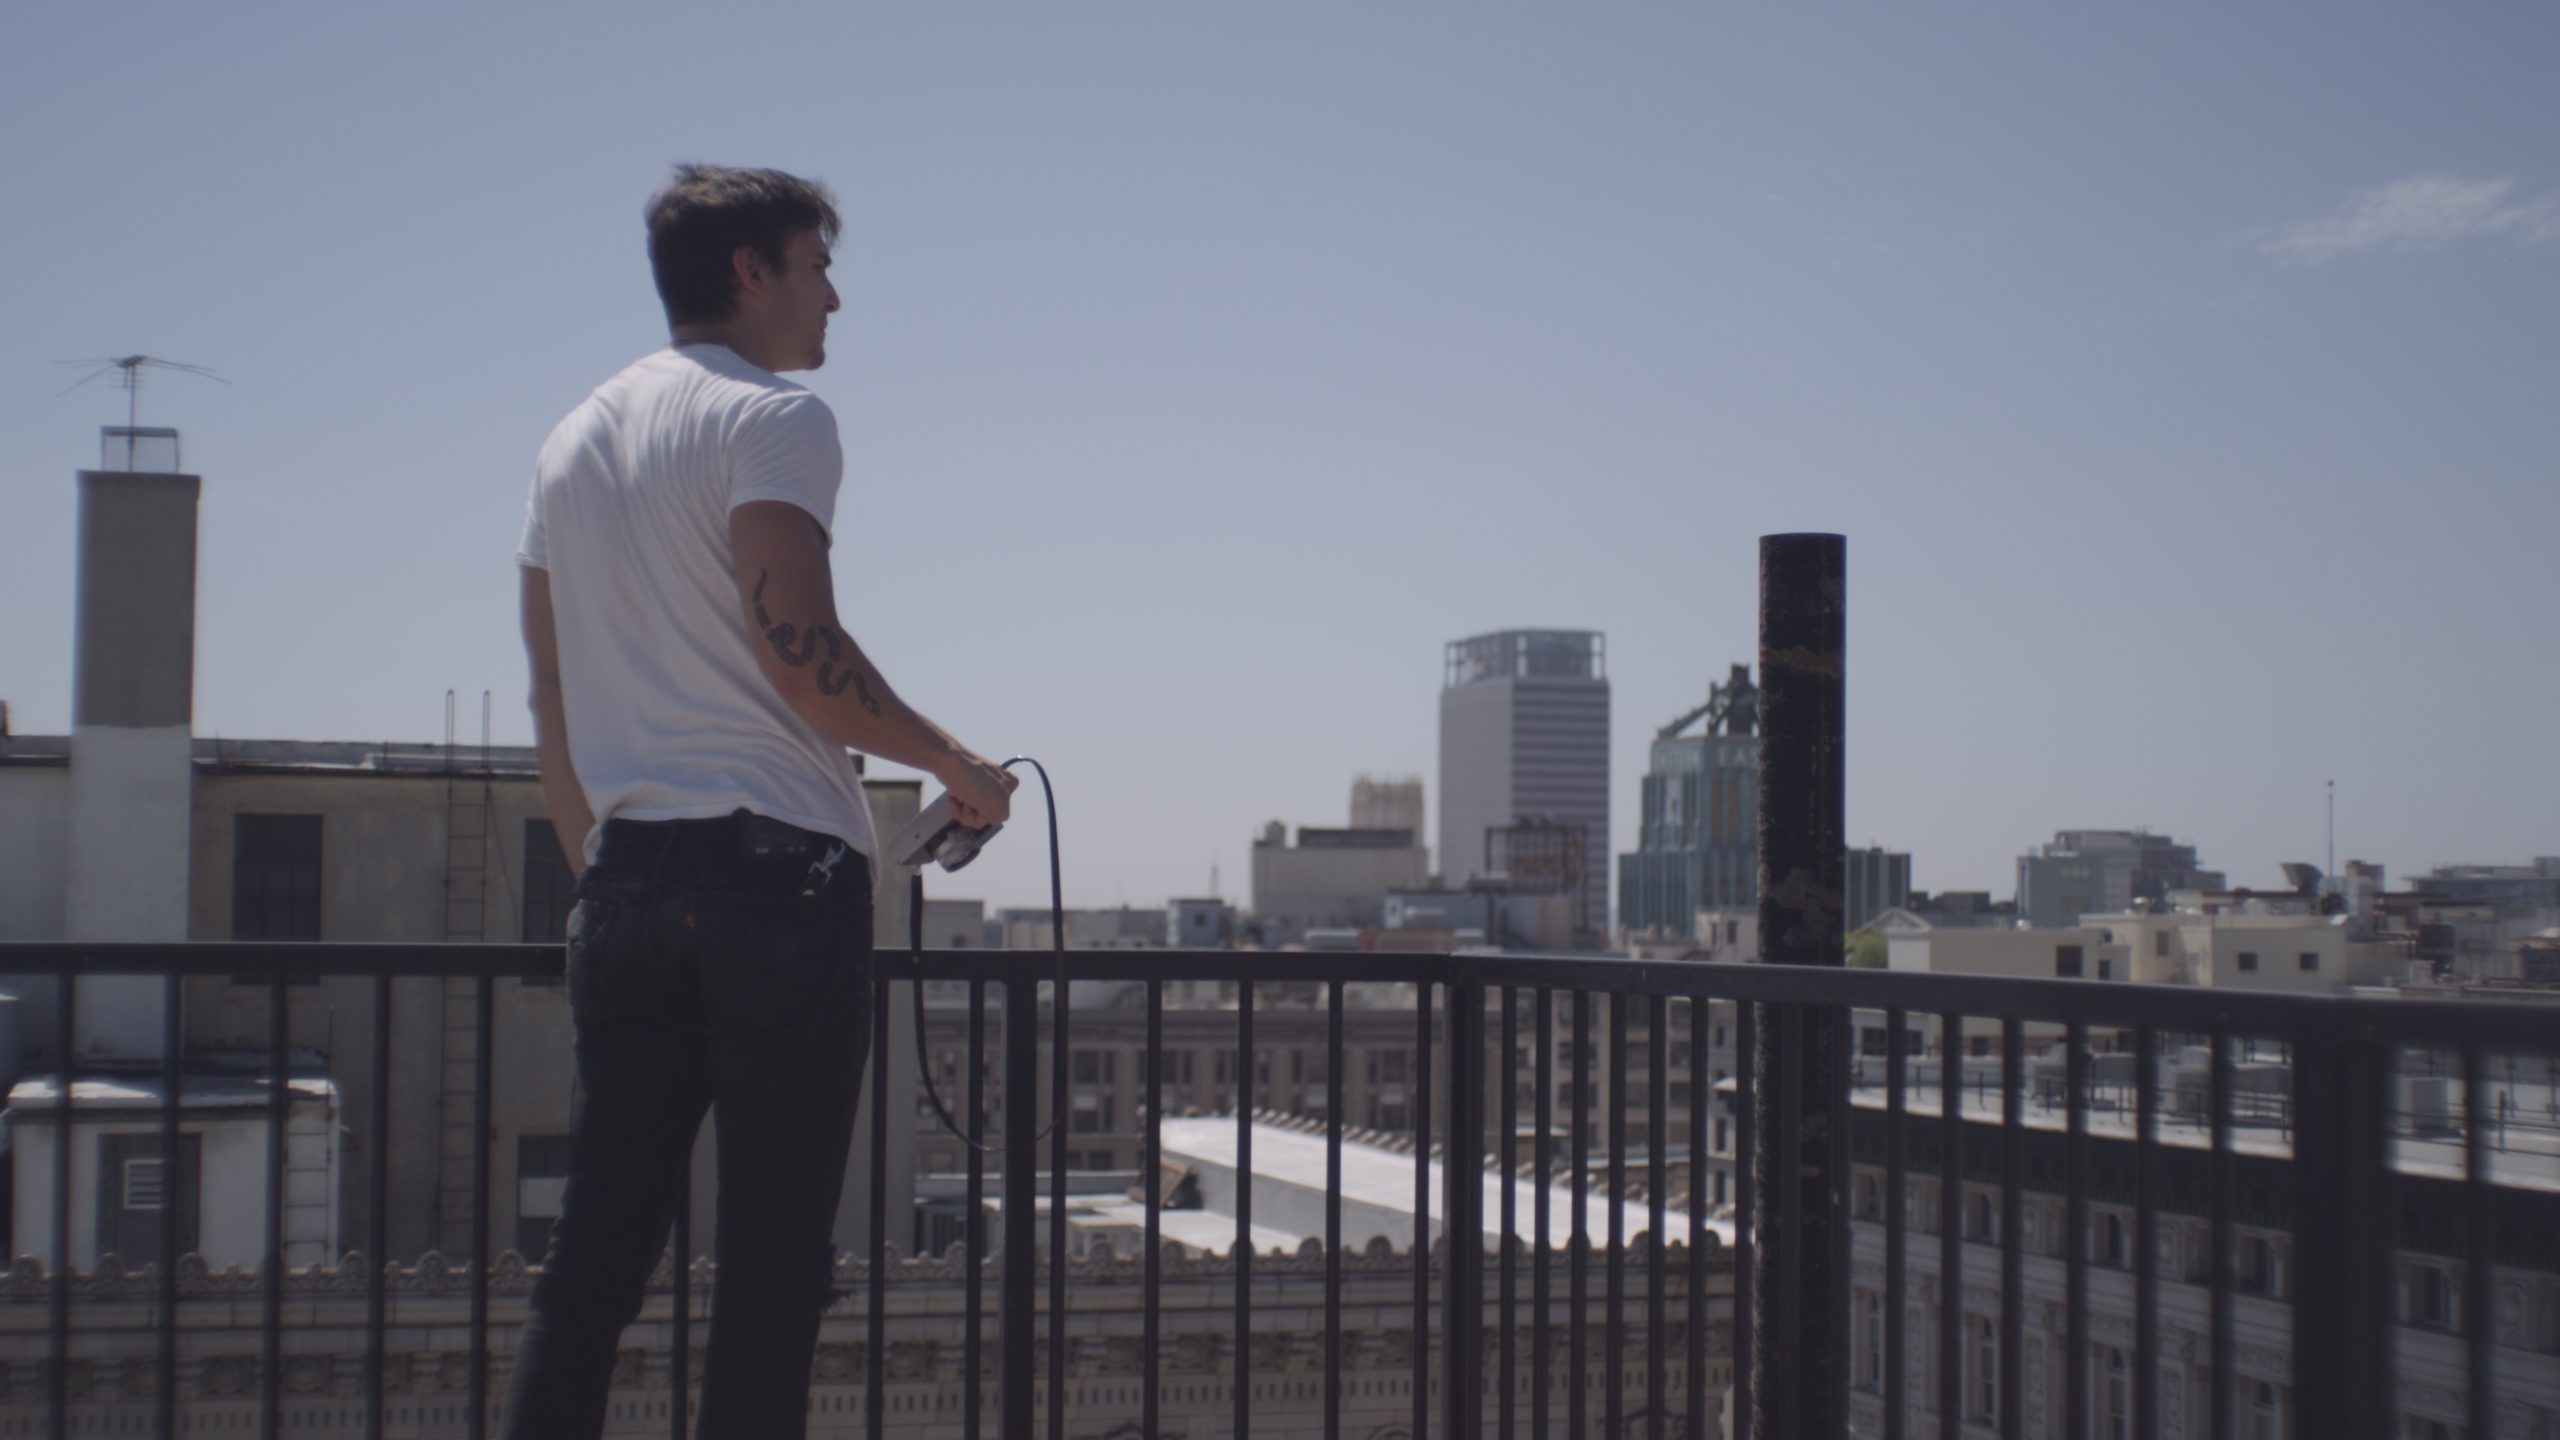 Uncreative Stories Joe Perri Profile View from behind of man with short brown hair wearing a white t shirt looking out over a city holding a camera